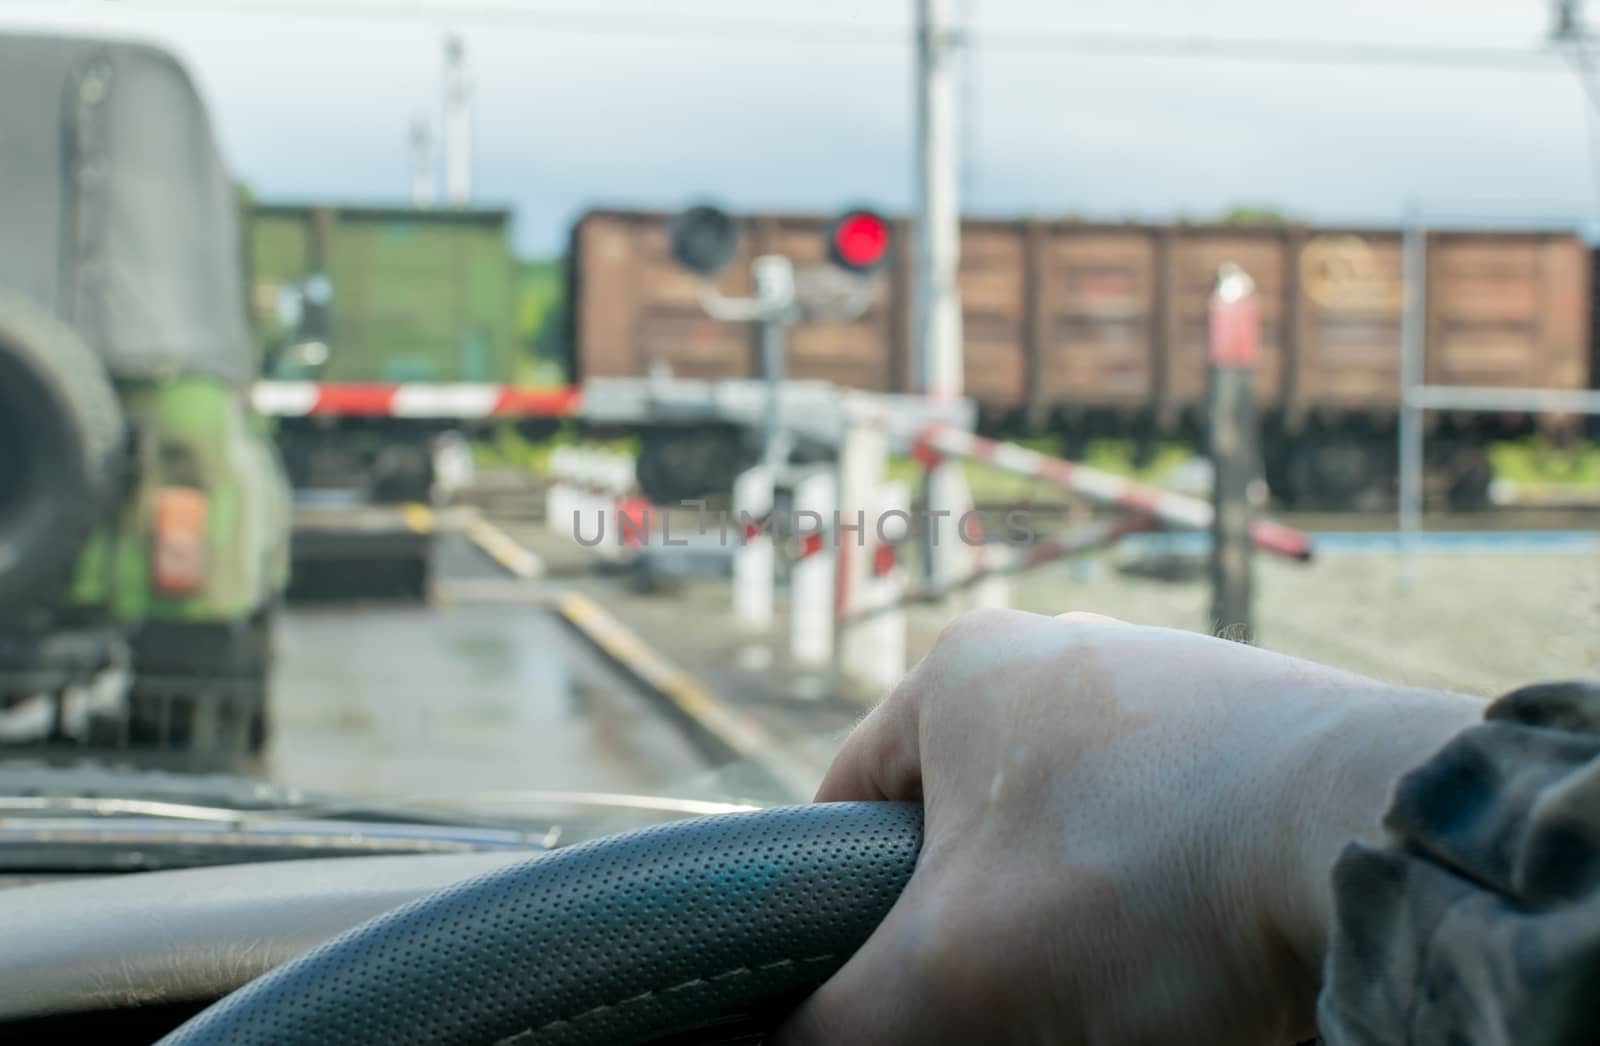 View of the driver hand on the steering wheel of the car, which stopped in front of a closed railway crossing at a red traffic light. The driver waits for the freight train to pass